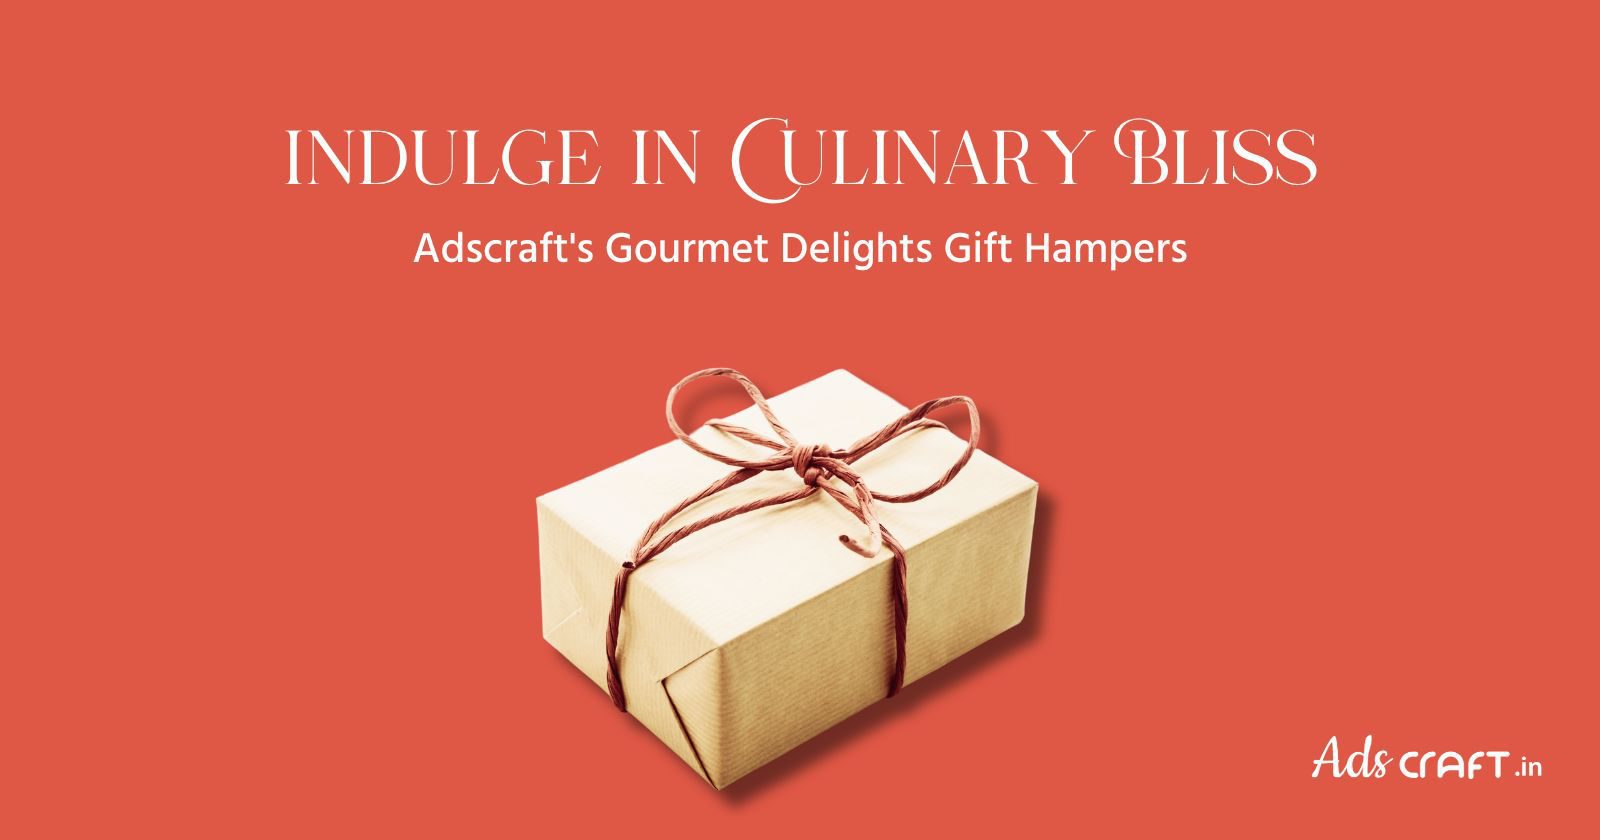 Indulge in Culinary Bliss Adscrafts Gourmet Delights Gift Hampers Adscraft.in An Amazing Gift For Lovely People